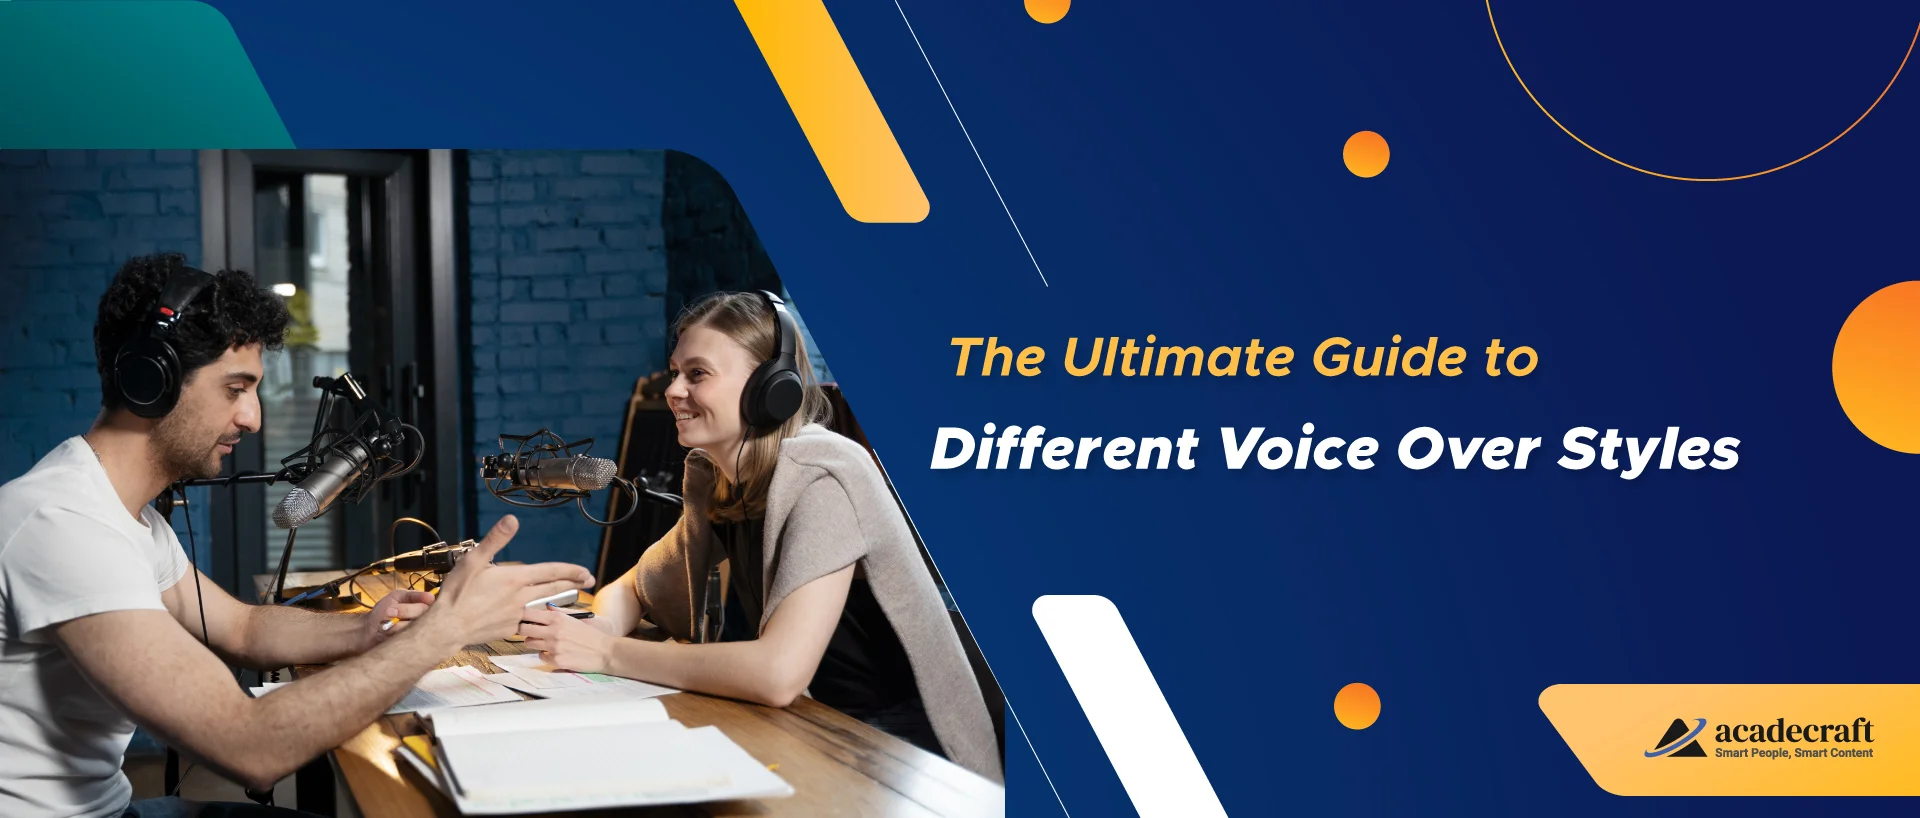 The Ultimate Guide to Different Voice Over Styles